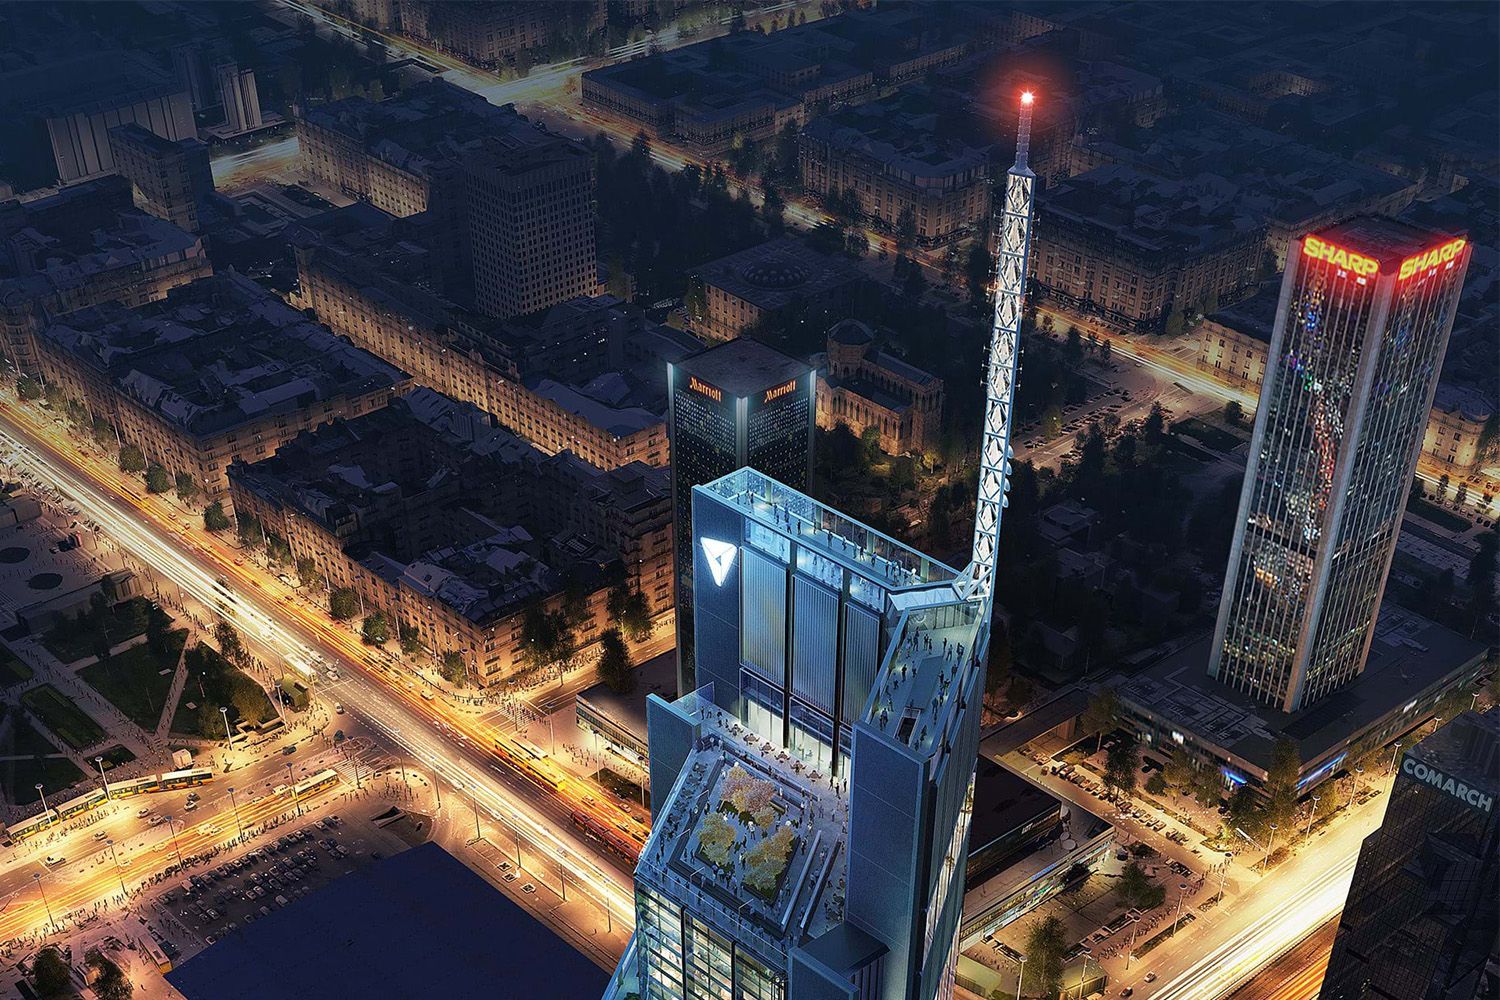 The Varso Tower becomes the EU’s tallest building